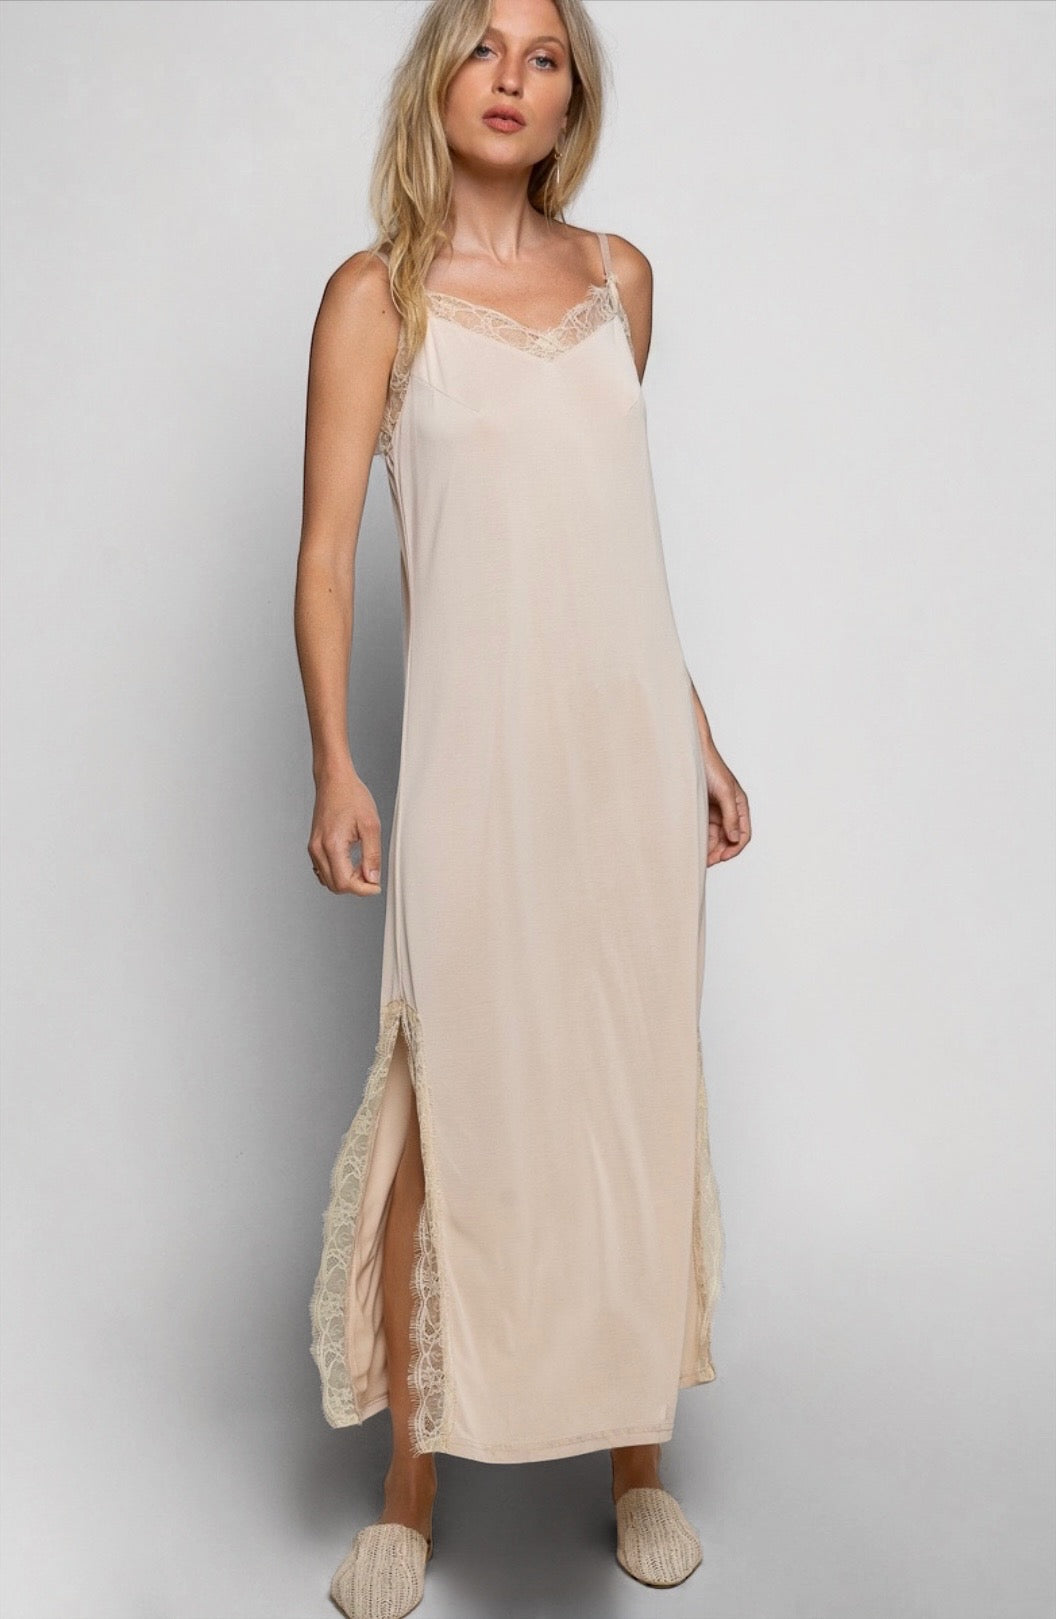 Stealing Hearts Lace Trimmed Maxi Slip Dress